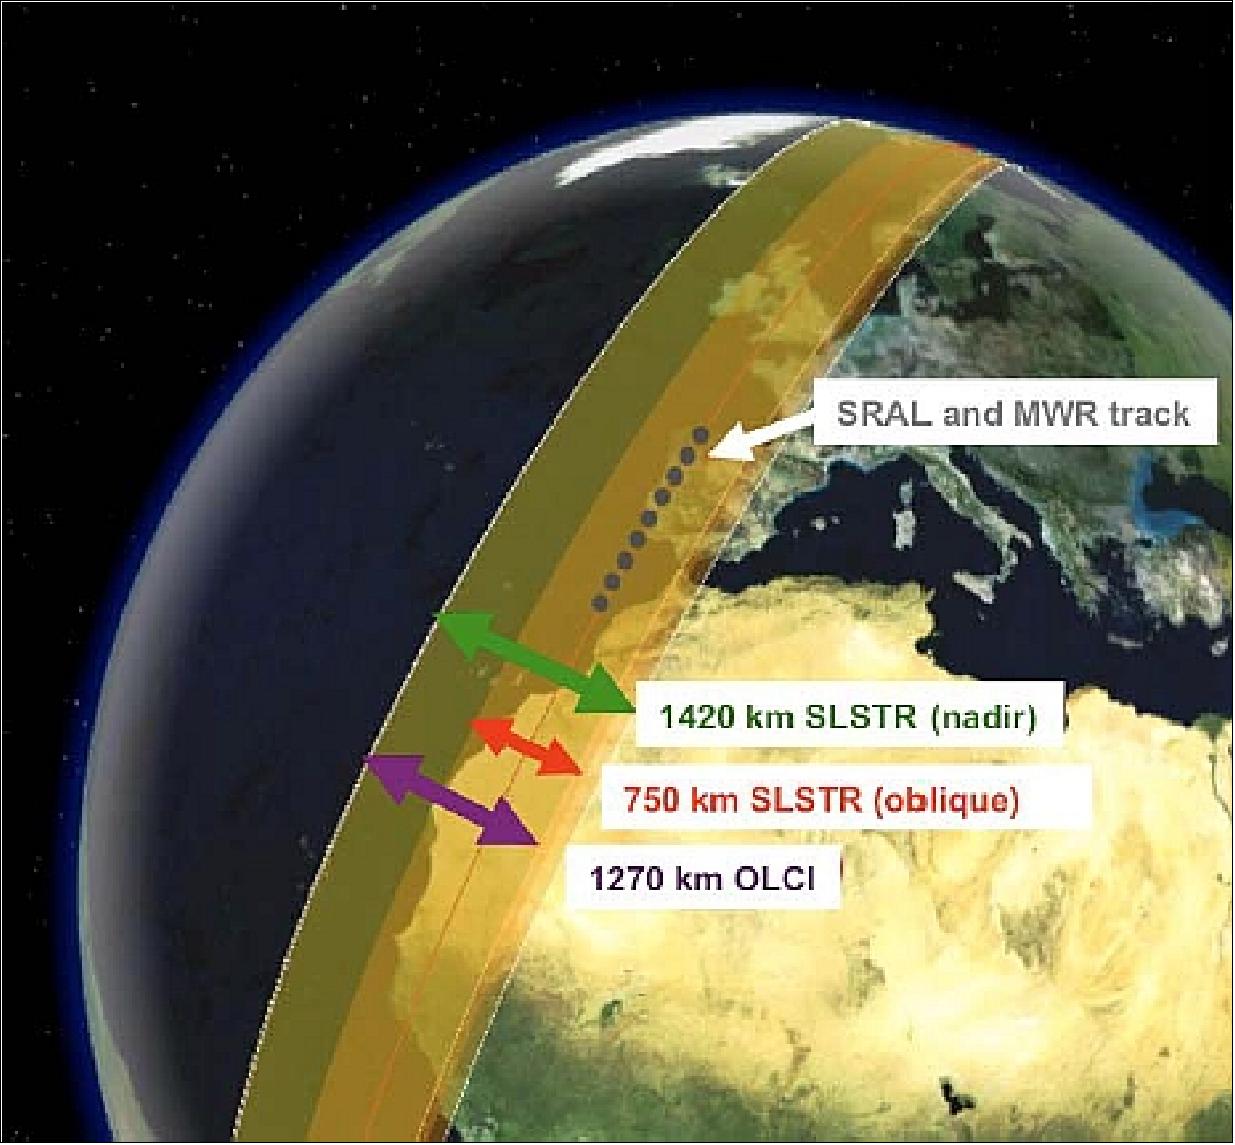 Figure 60: FOVs (Field of Views) of the Sentinel-3 instruments (image credit: ESA)